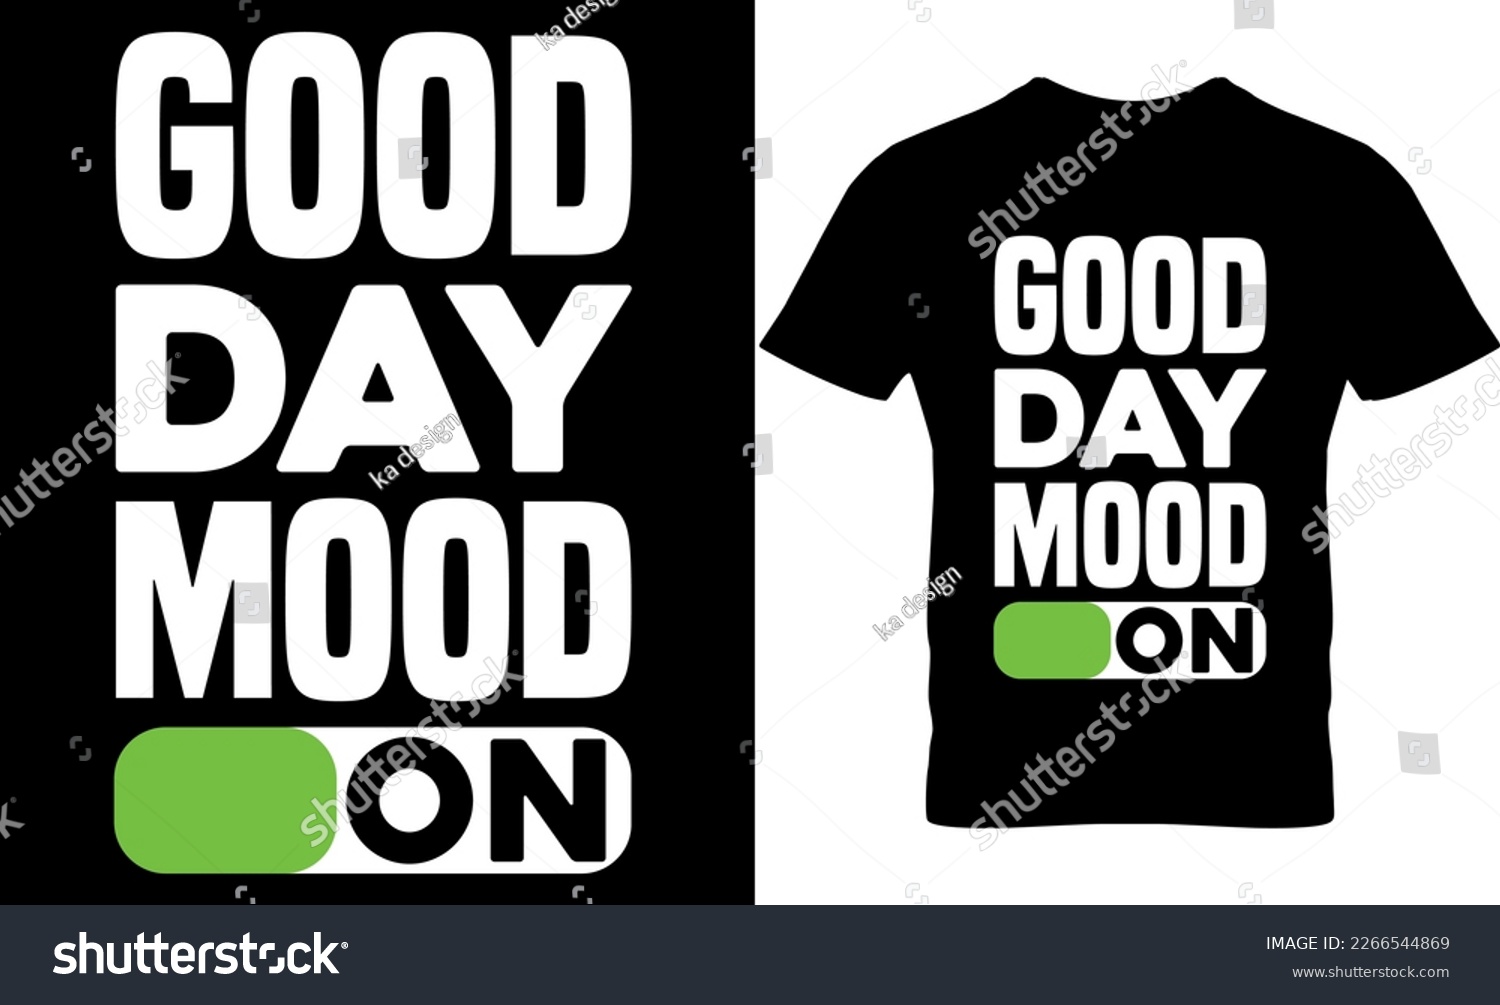 SVG of Good day mood on, Graphic, illustration, vector, typography, motivational, inspiration, inspiration t-shirt design, Typography t-shirt design, motivational quotes, motivational t-shirt design, svg